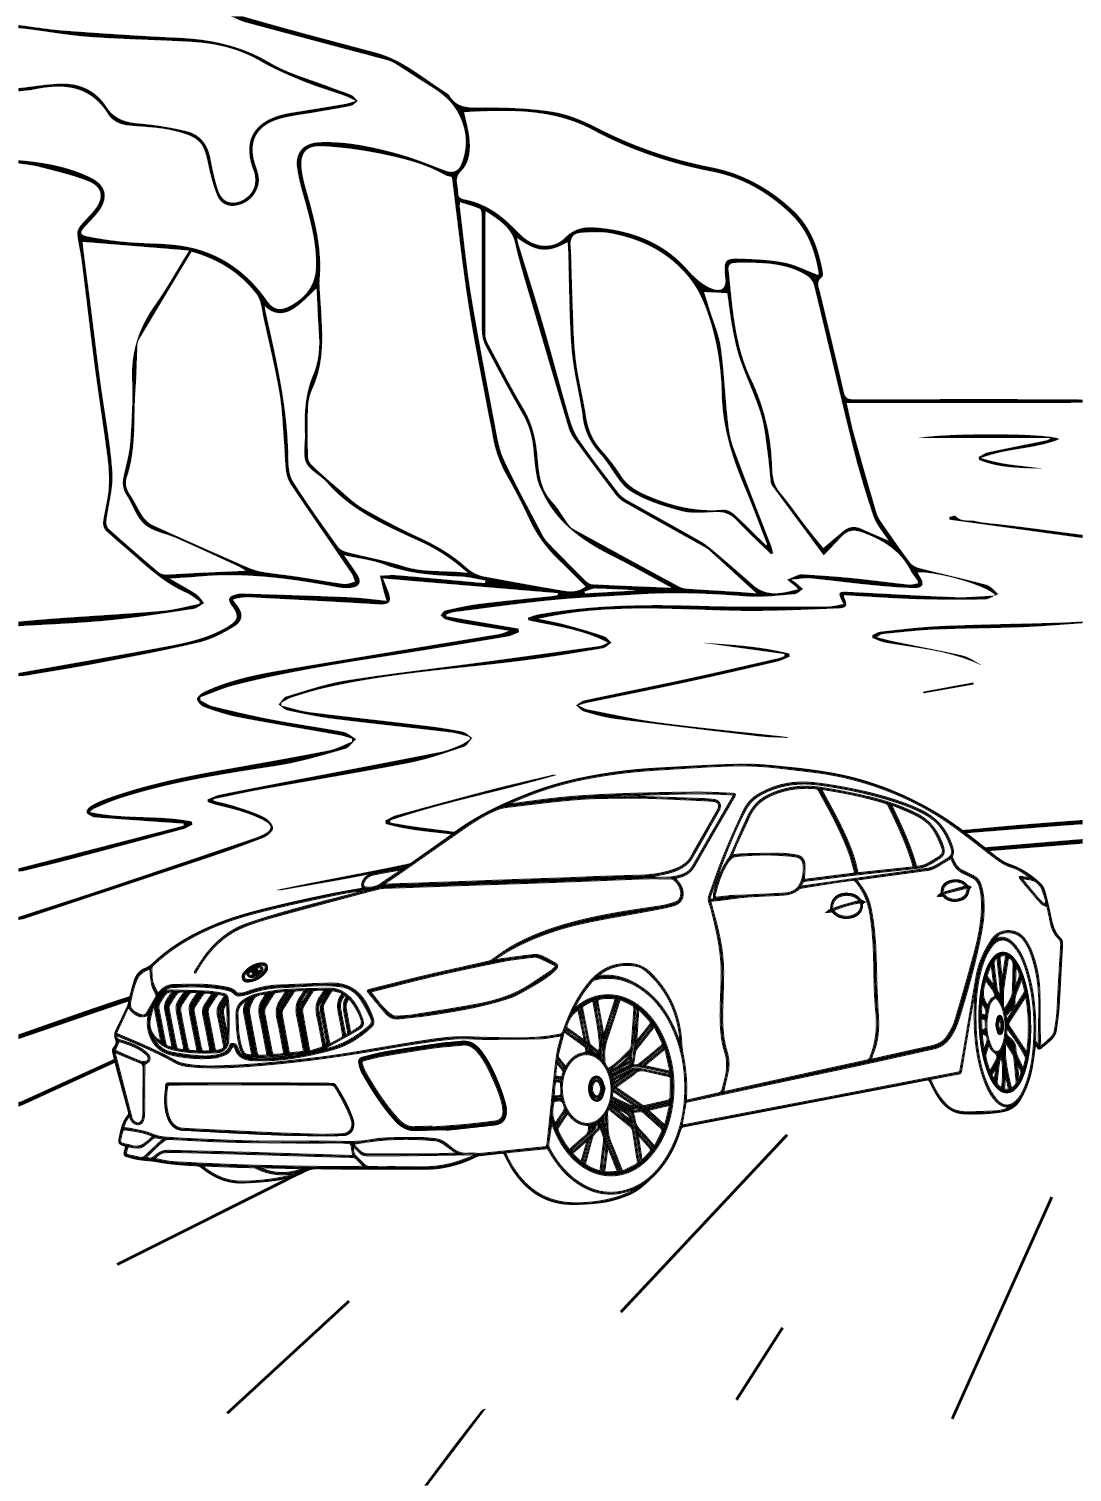 BMW M8 Coloring Page from BMW